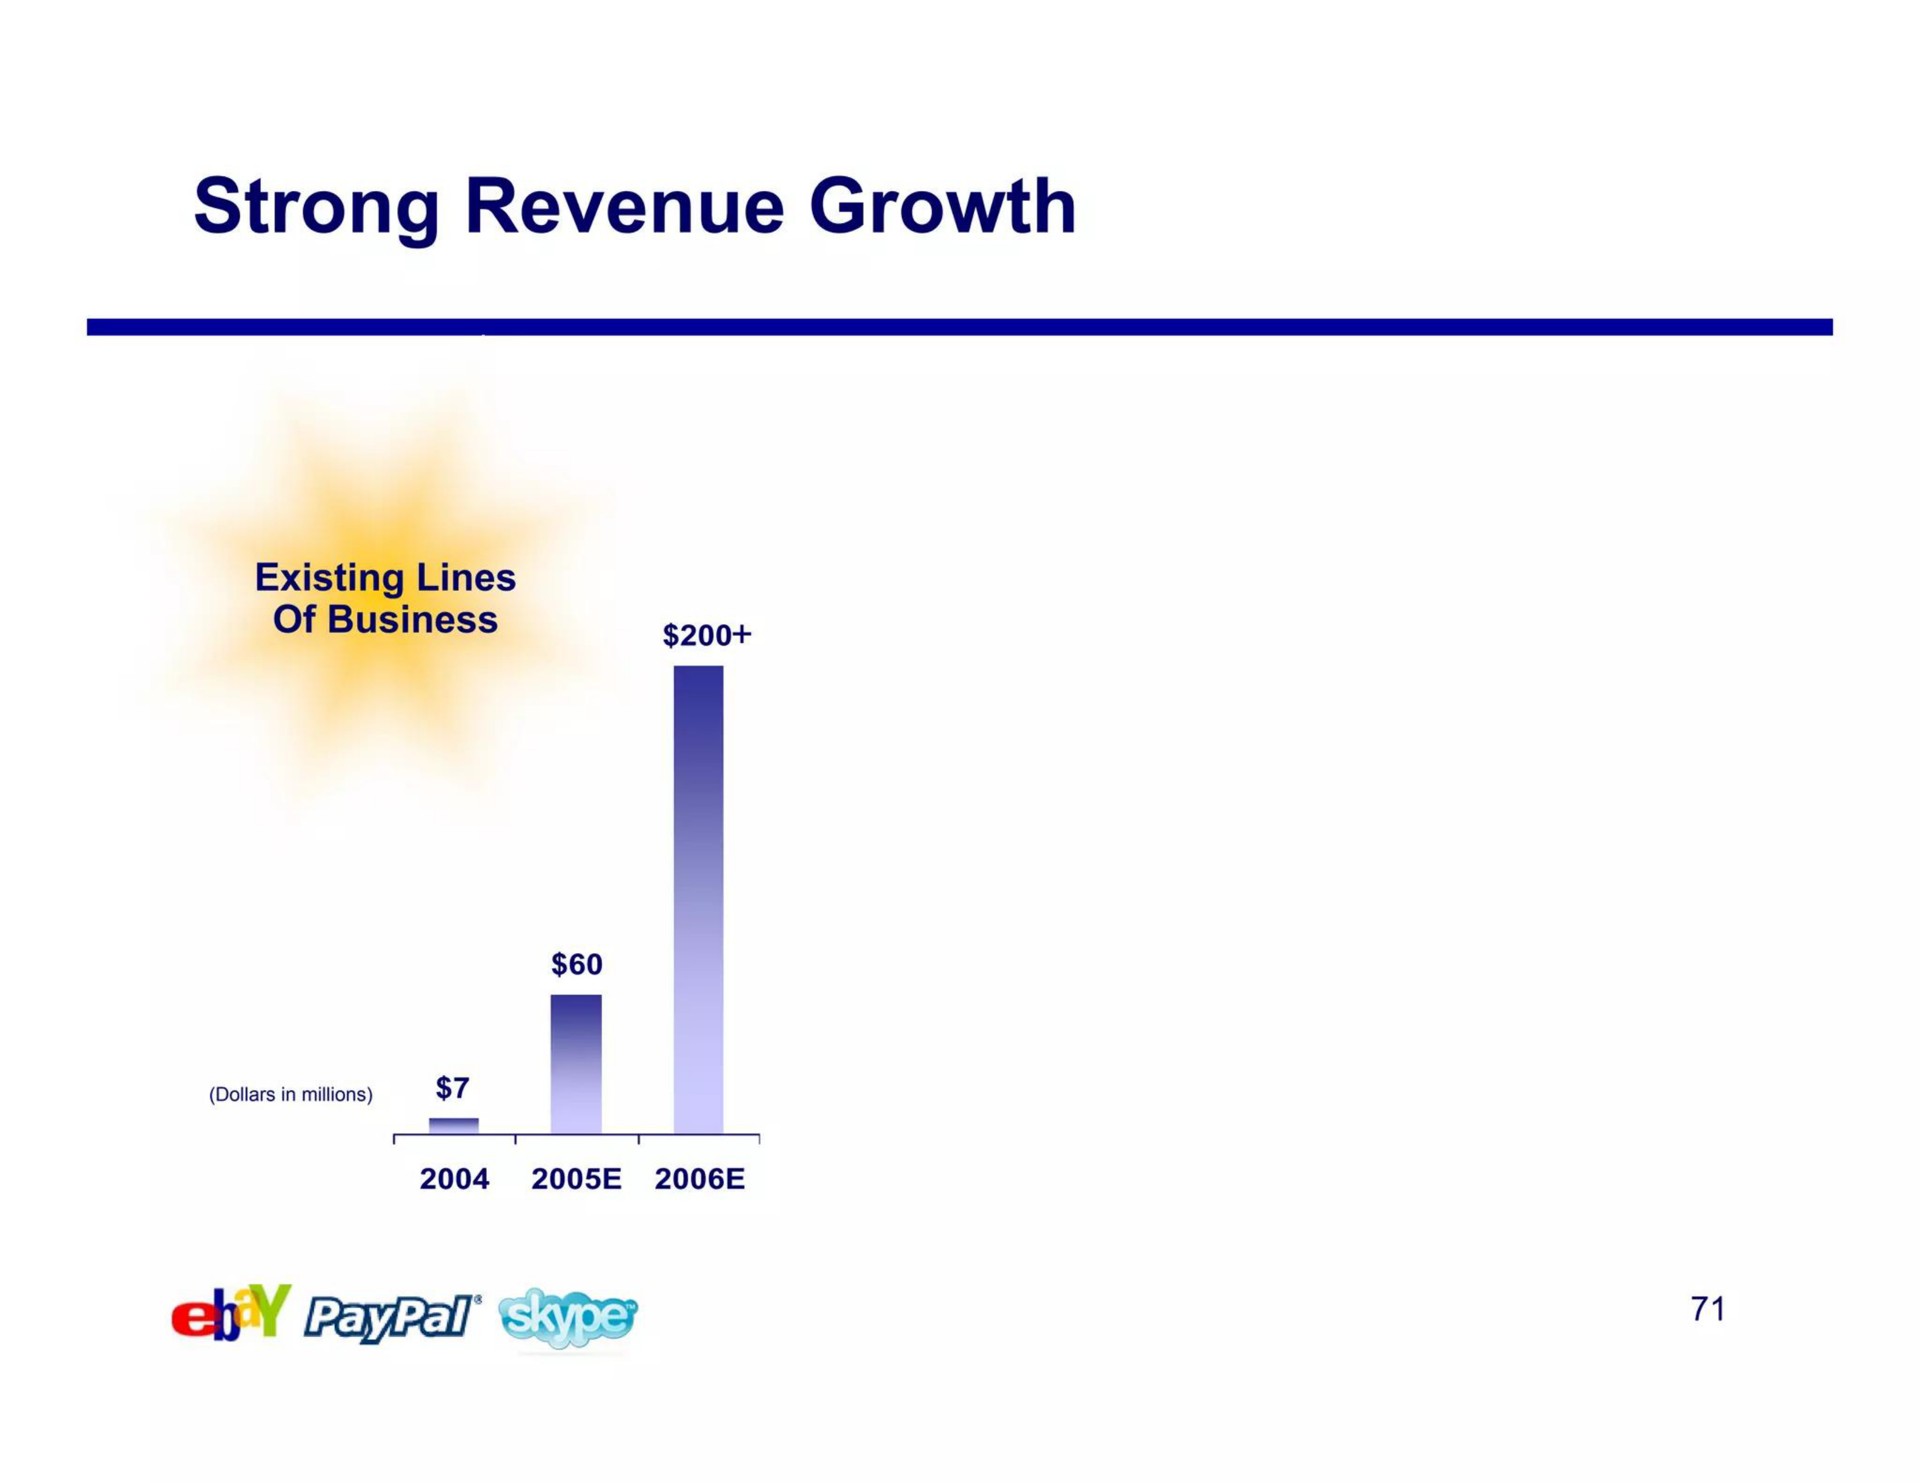 strong revenue growth | eBay